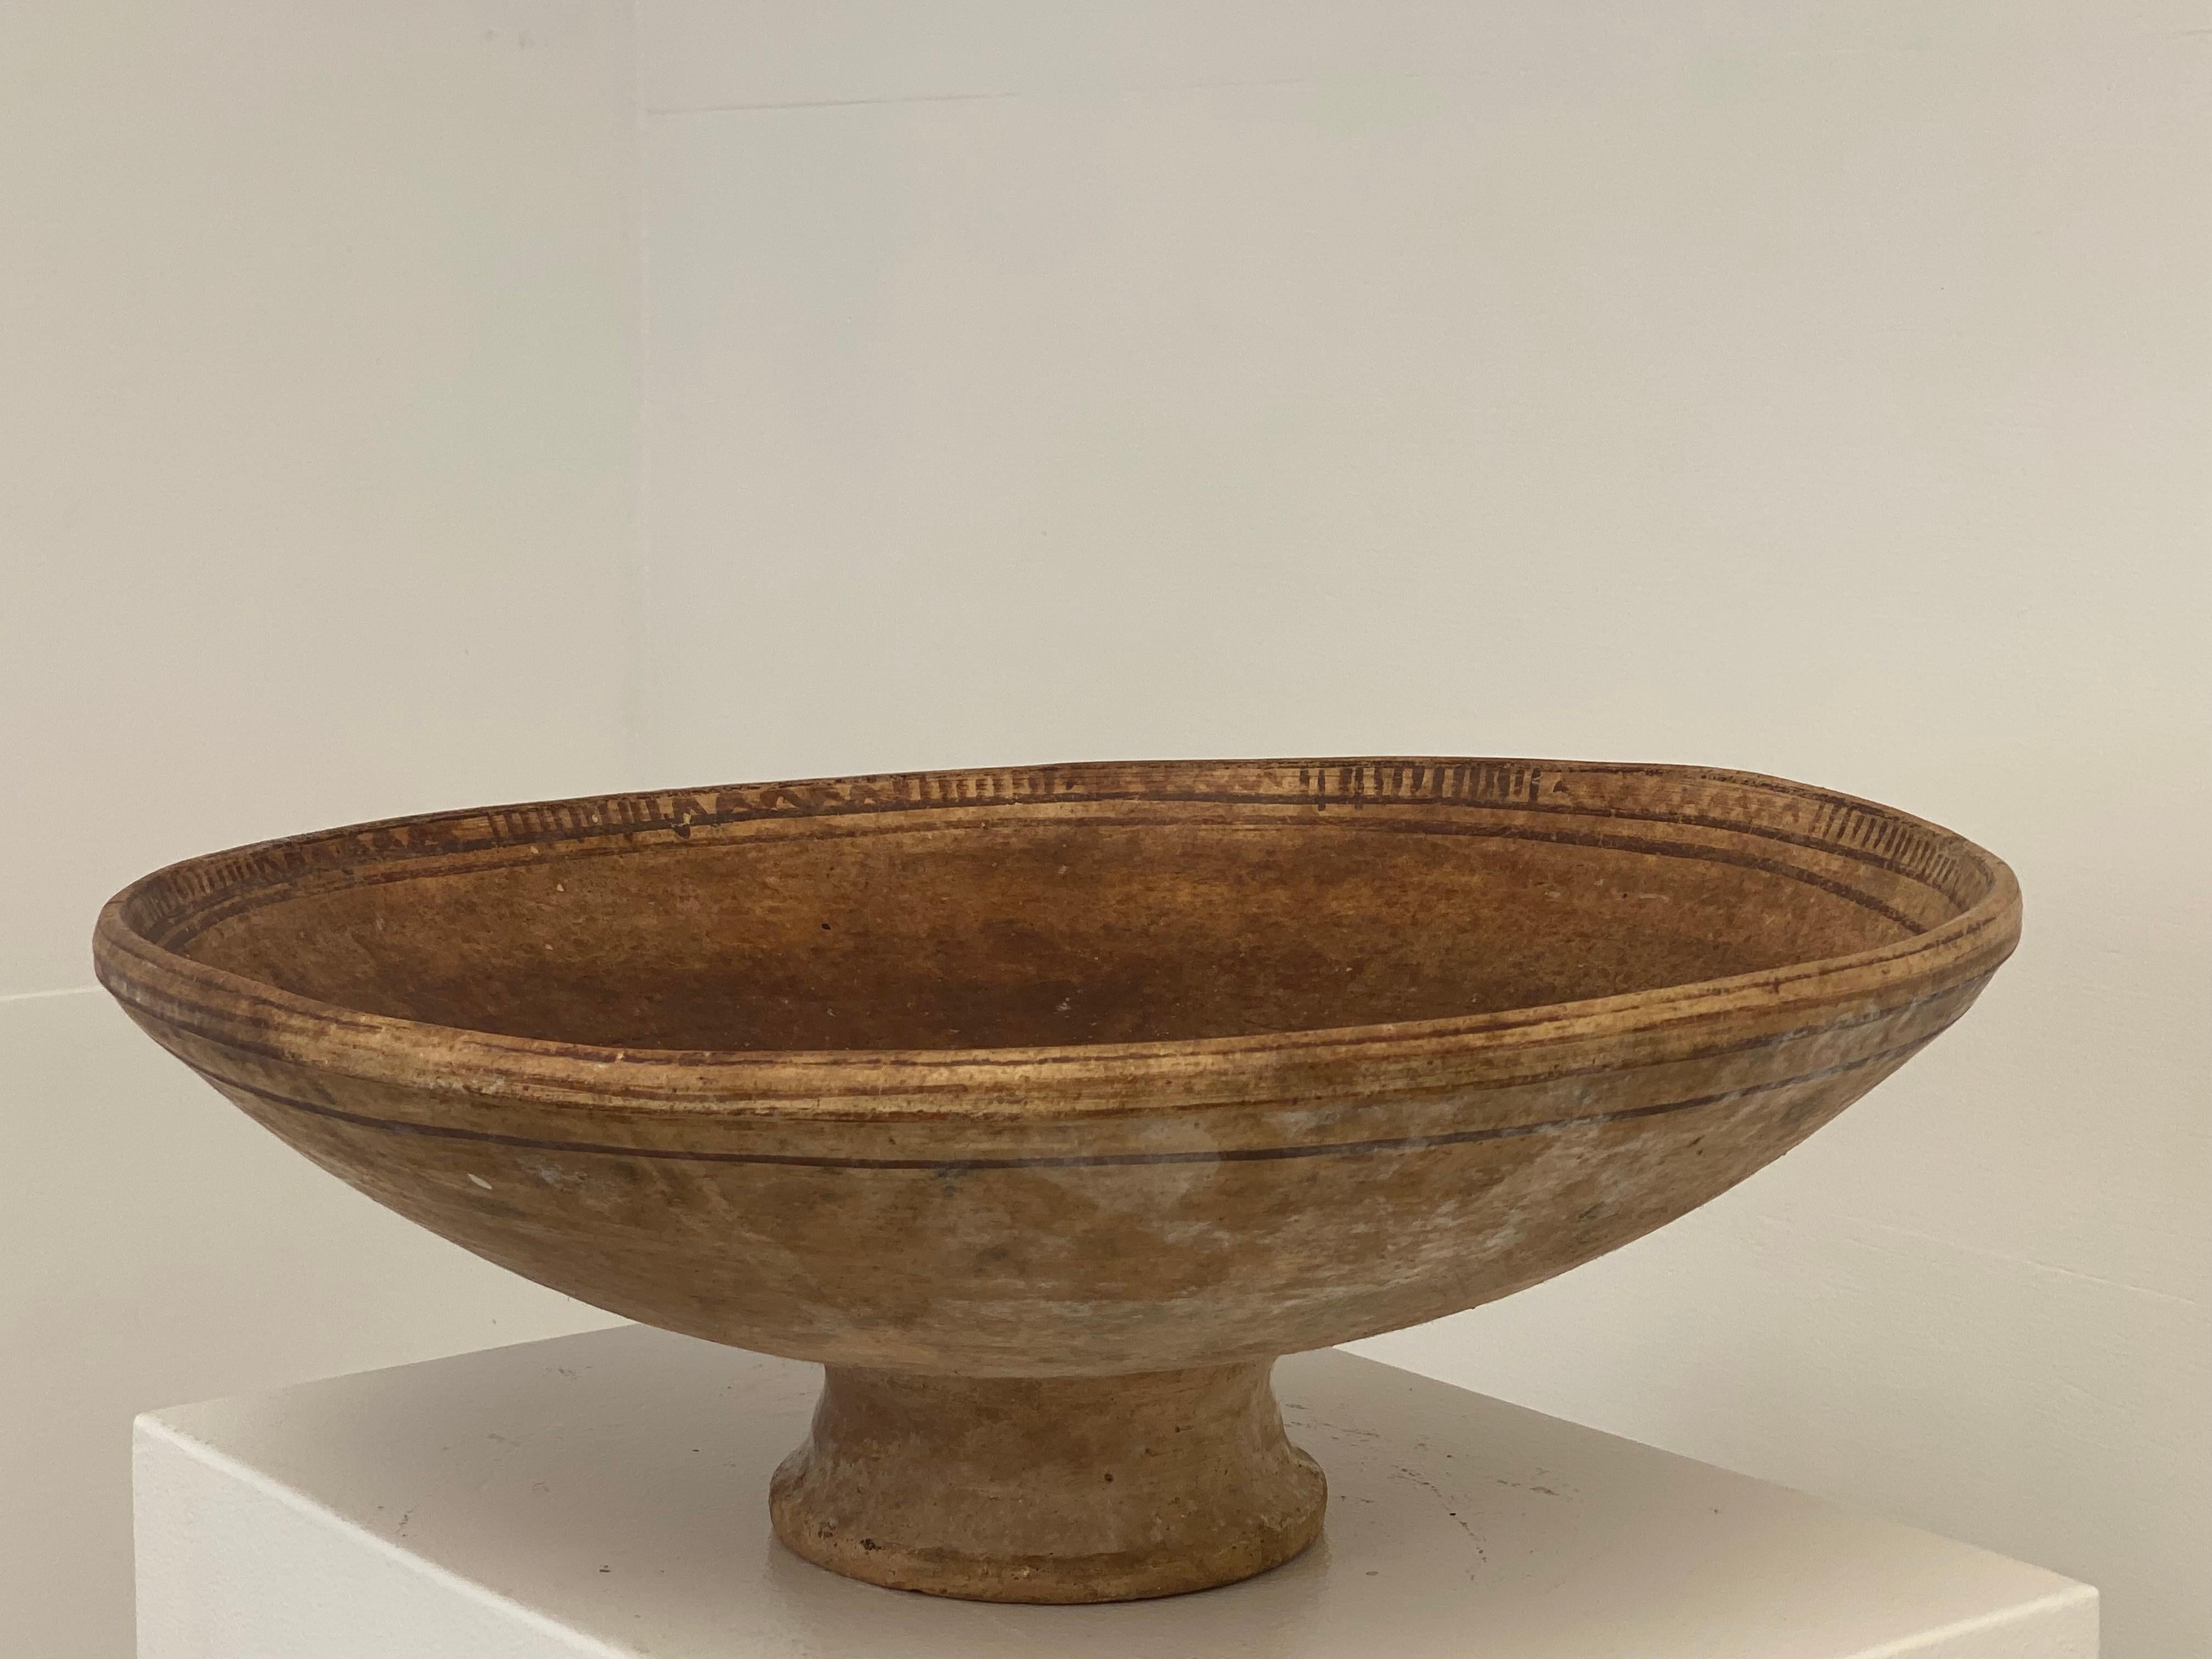 Antique, Terracotta Berber Bowl on a central foot In Excellent Condition For Sale In Schellebelle, BE